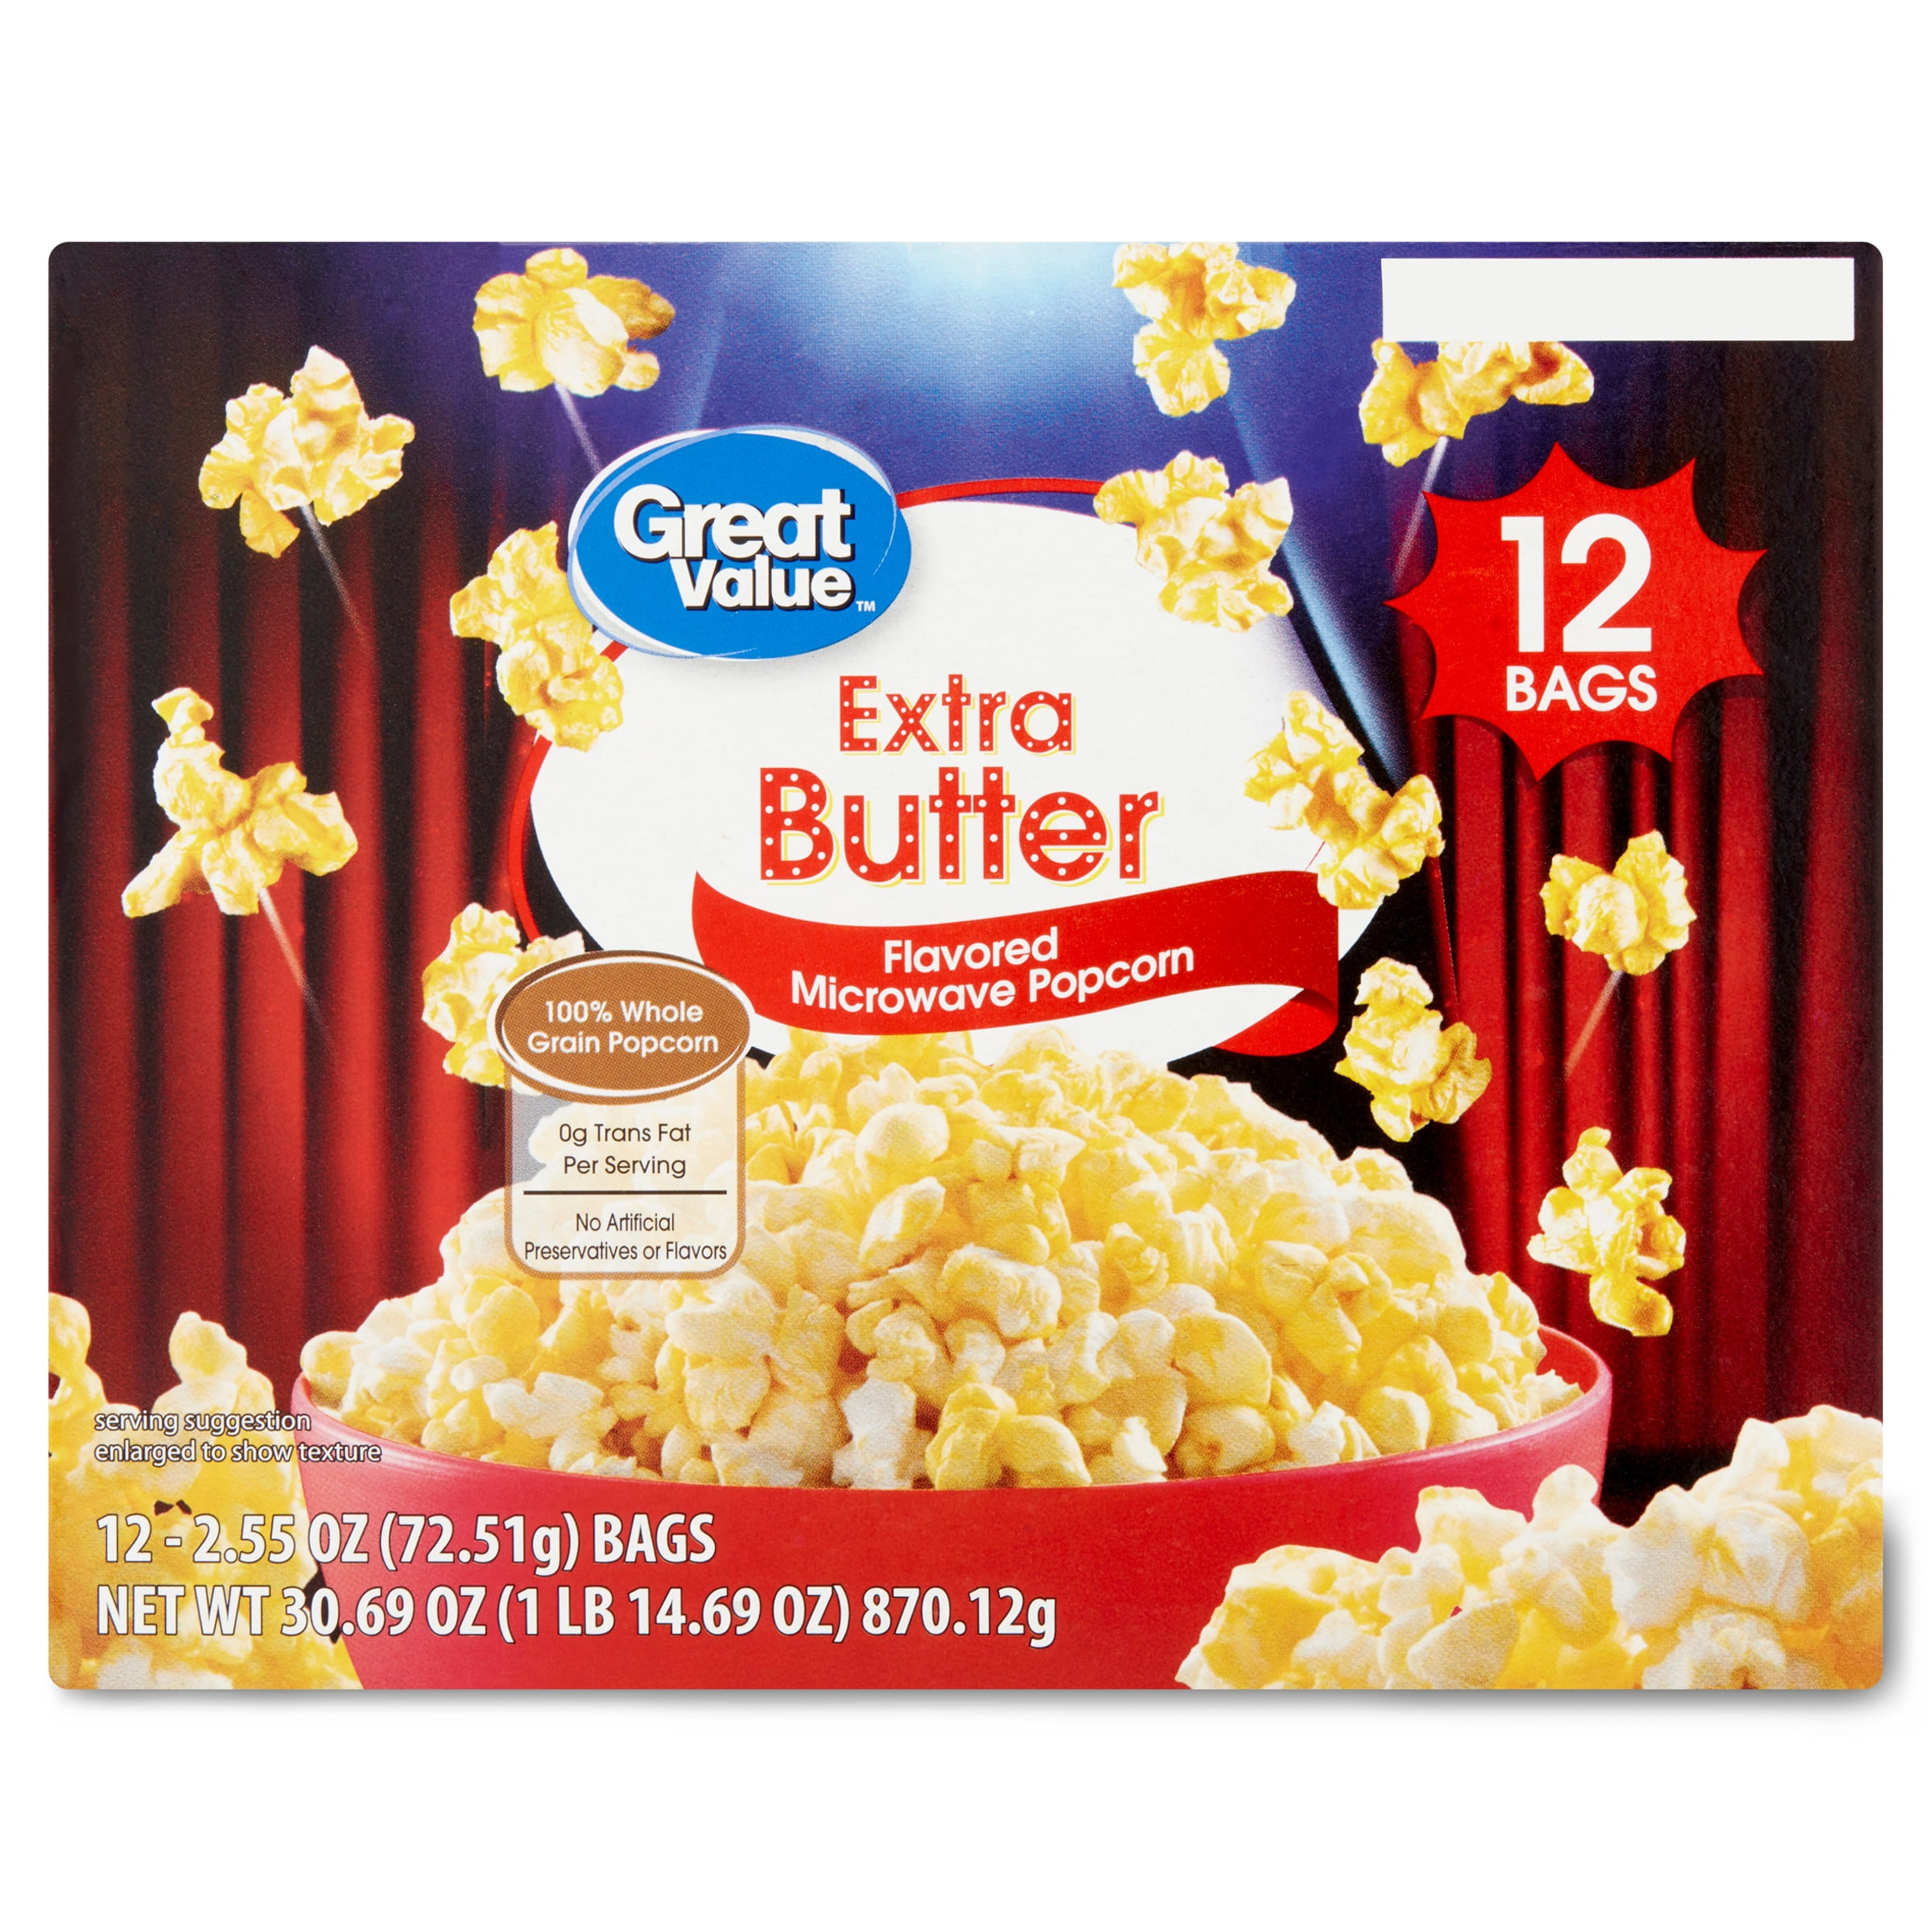 Great Value Extra Butter Flavored Microwave Popcorn, 2.55 Oz, 12 Count